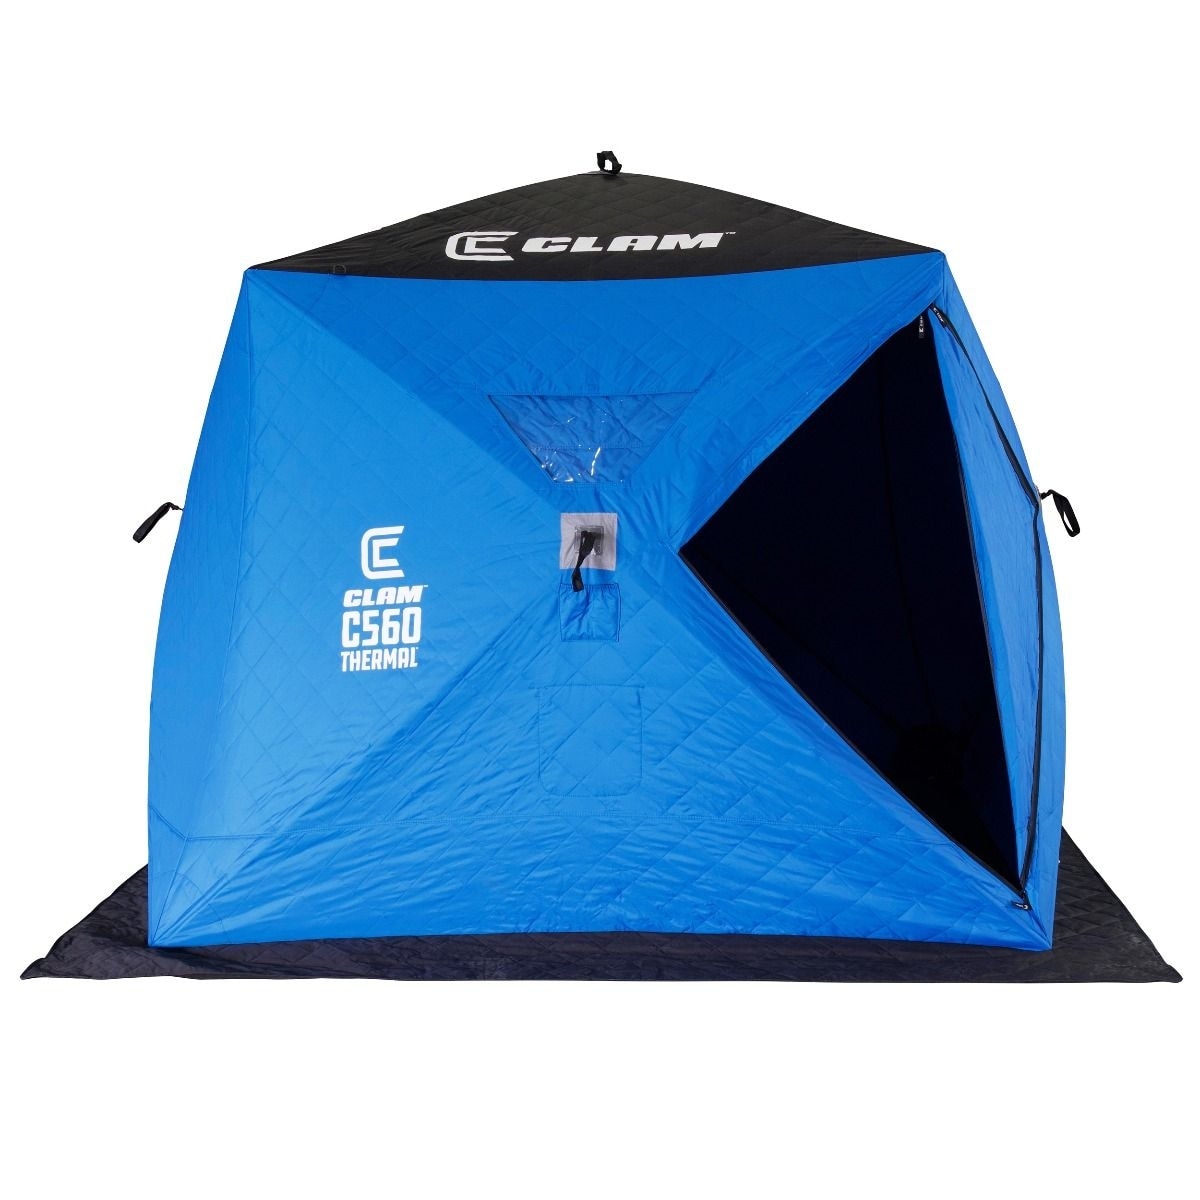 CLAM C-560 Portable 7.5 Ft 4 Person Pop Up Ice Fis...